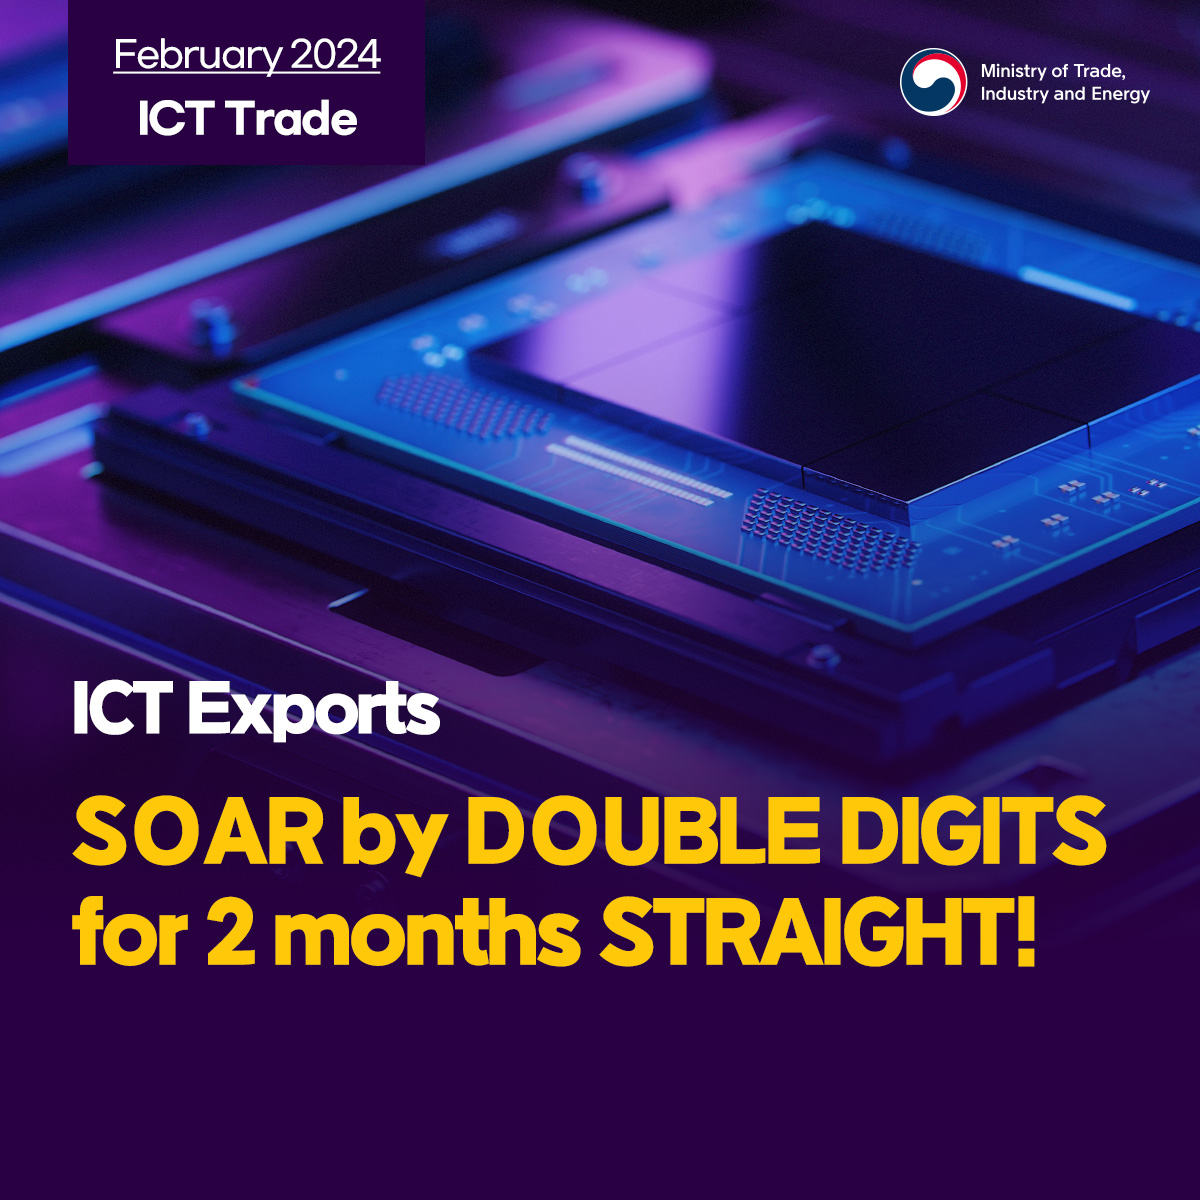 Korea's ICT exports soar by double digits for 2 months straight!